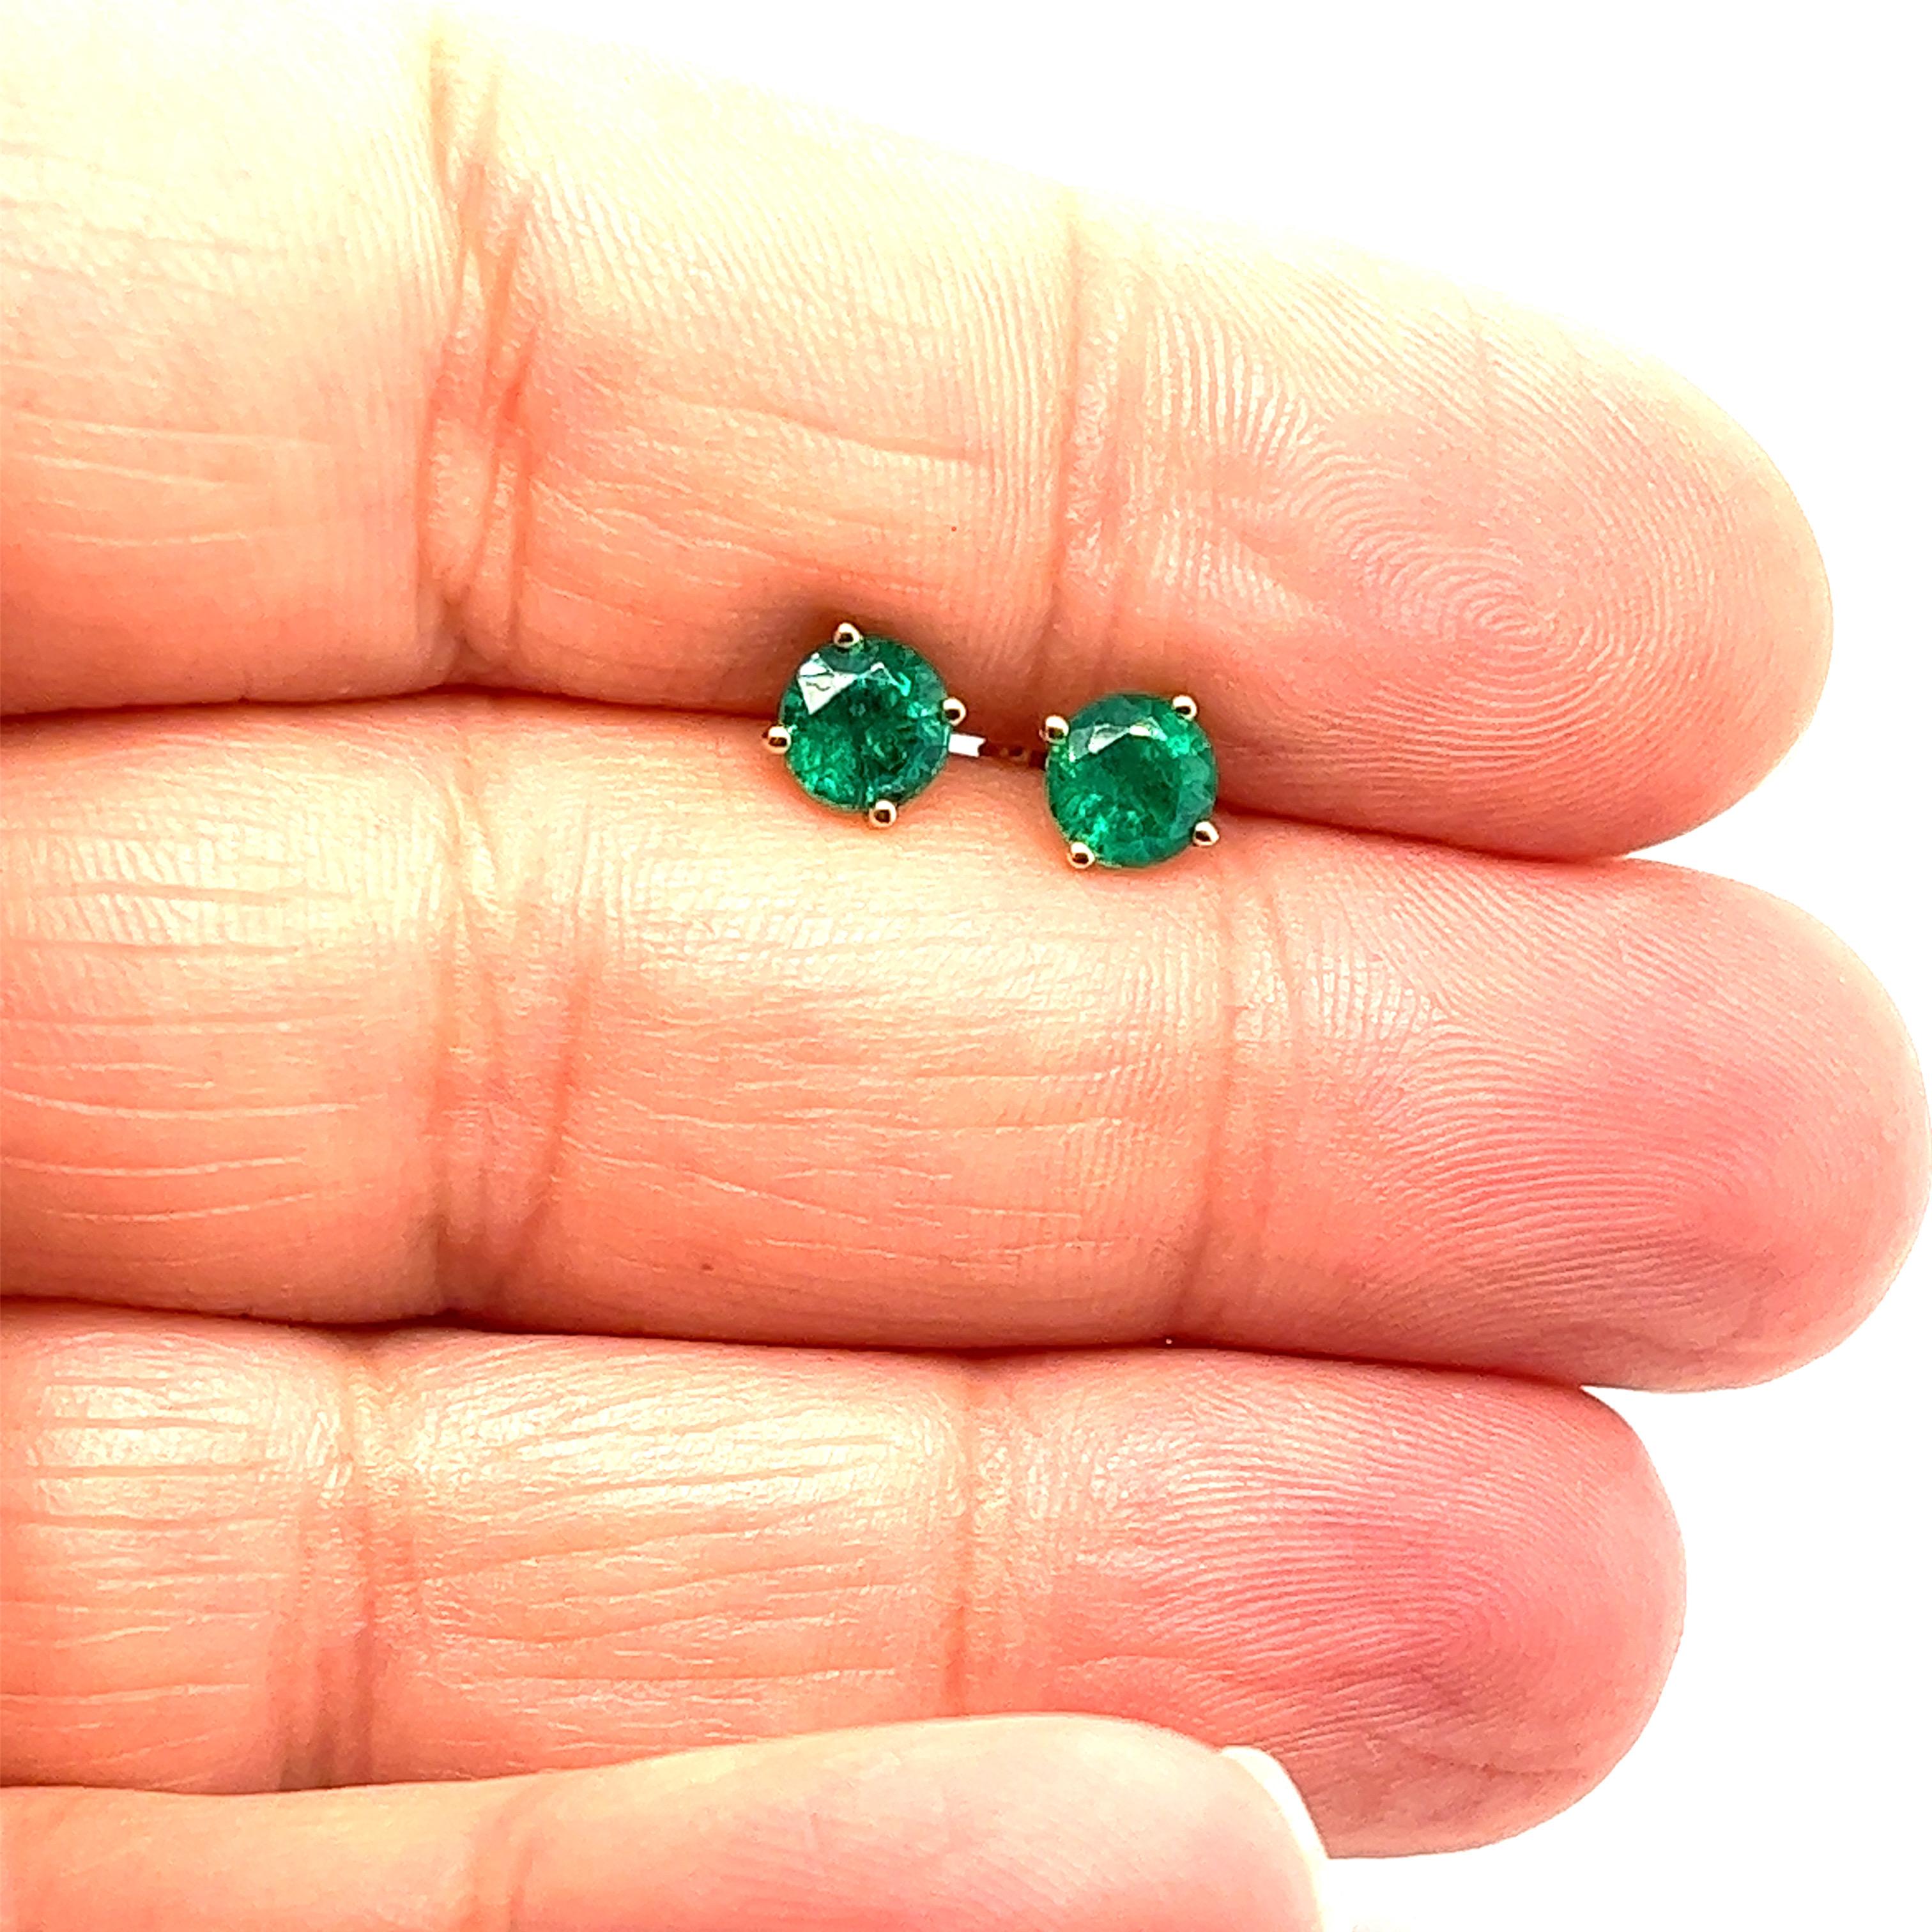 Contemporary 1.31 carats round Emerald Stud Earrings in 14K Yellow Gold. For Sale